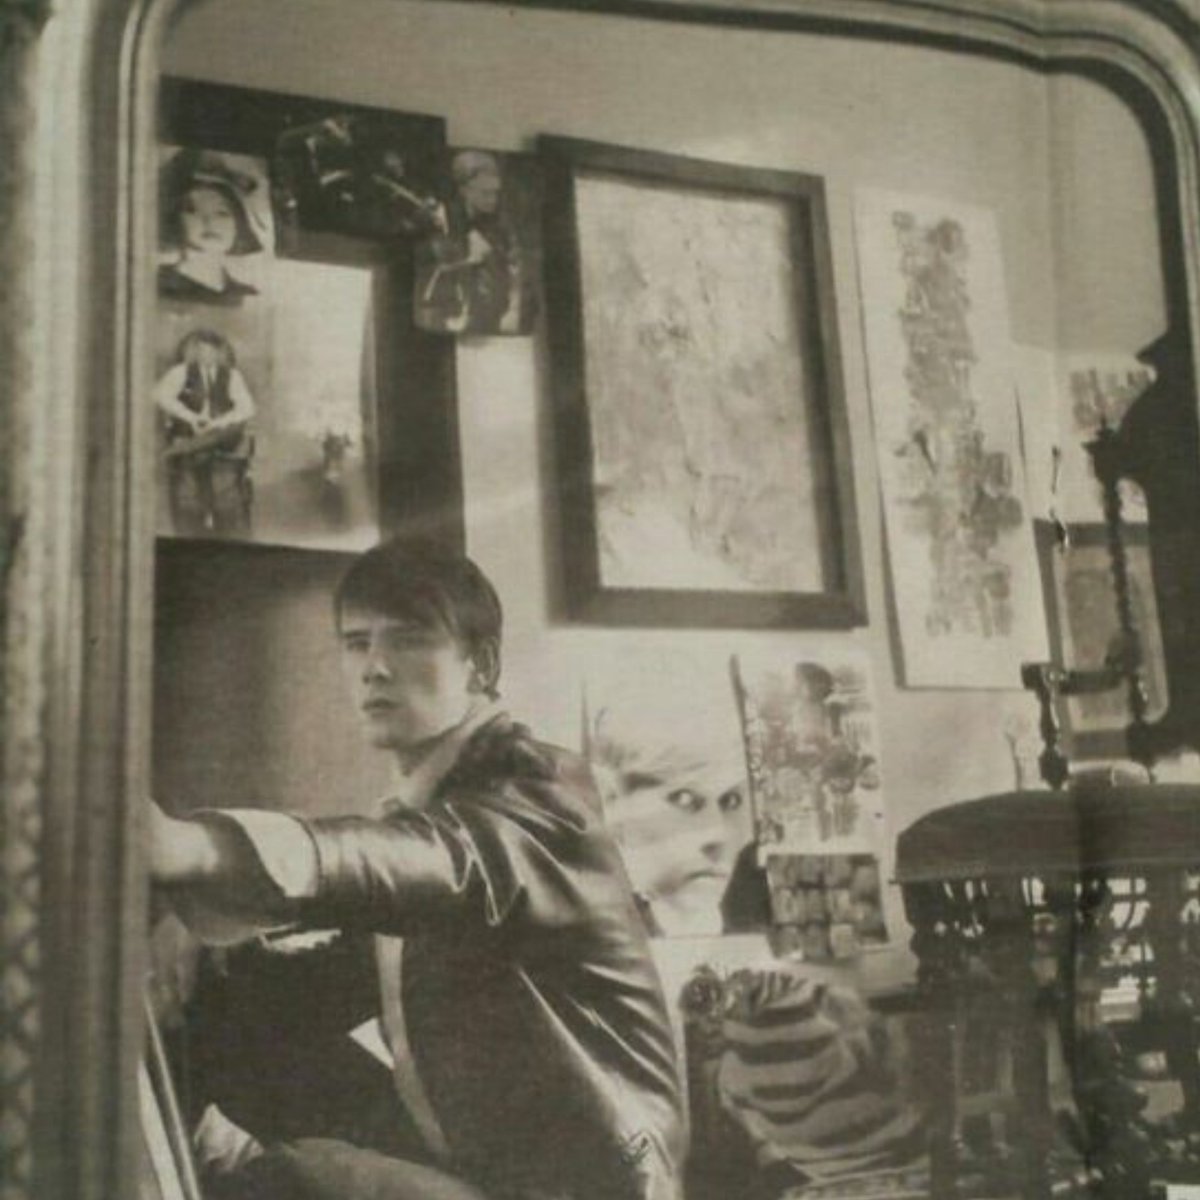 A Hard Day's Night.  A mirror into the artful muse of #StuartSutcliffe Genius on canvas or styling the Beatles iconic zenith.  Rediscover discerning #60sArt collection and celebrate the legend @SutcliffeEstate bit.ly/3GkyPdK     
#AllYouNeedXXX